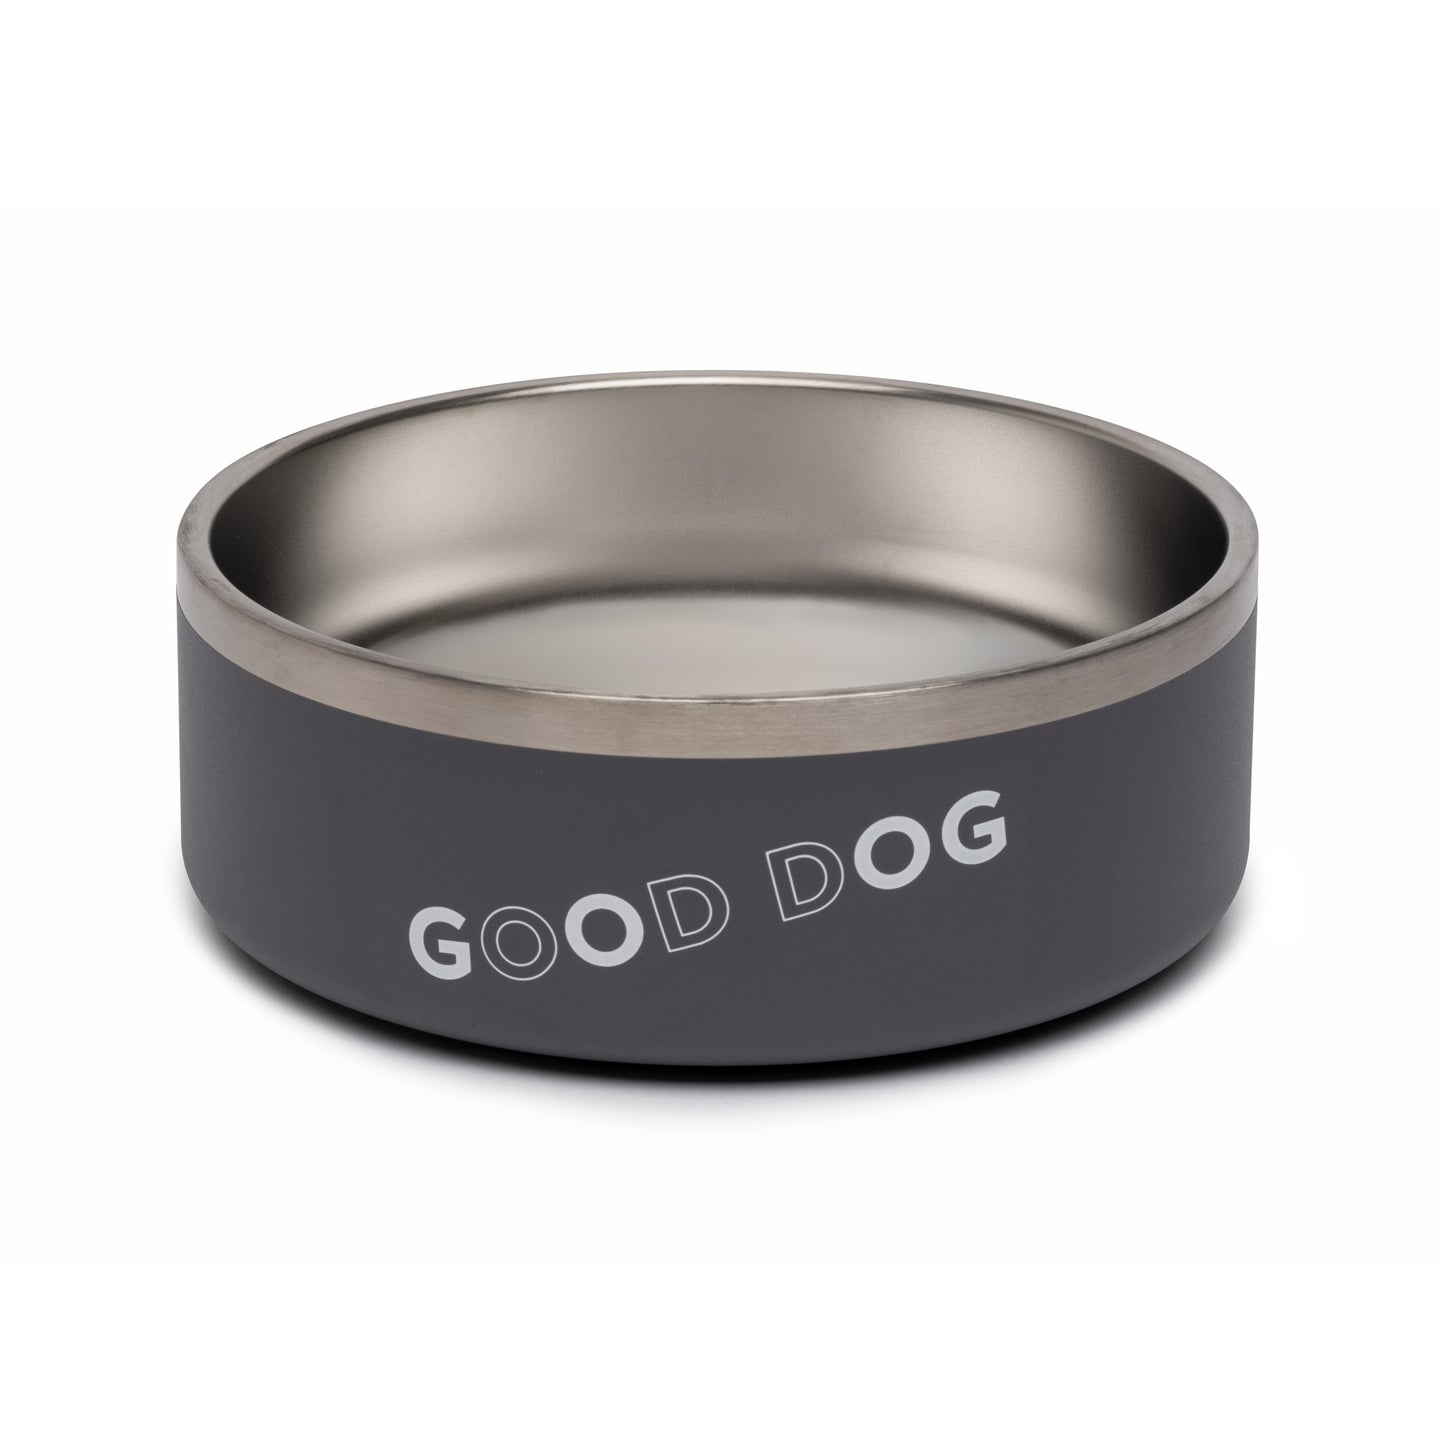 Good Dog Stainless Steel Bowl